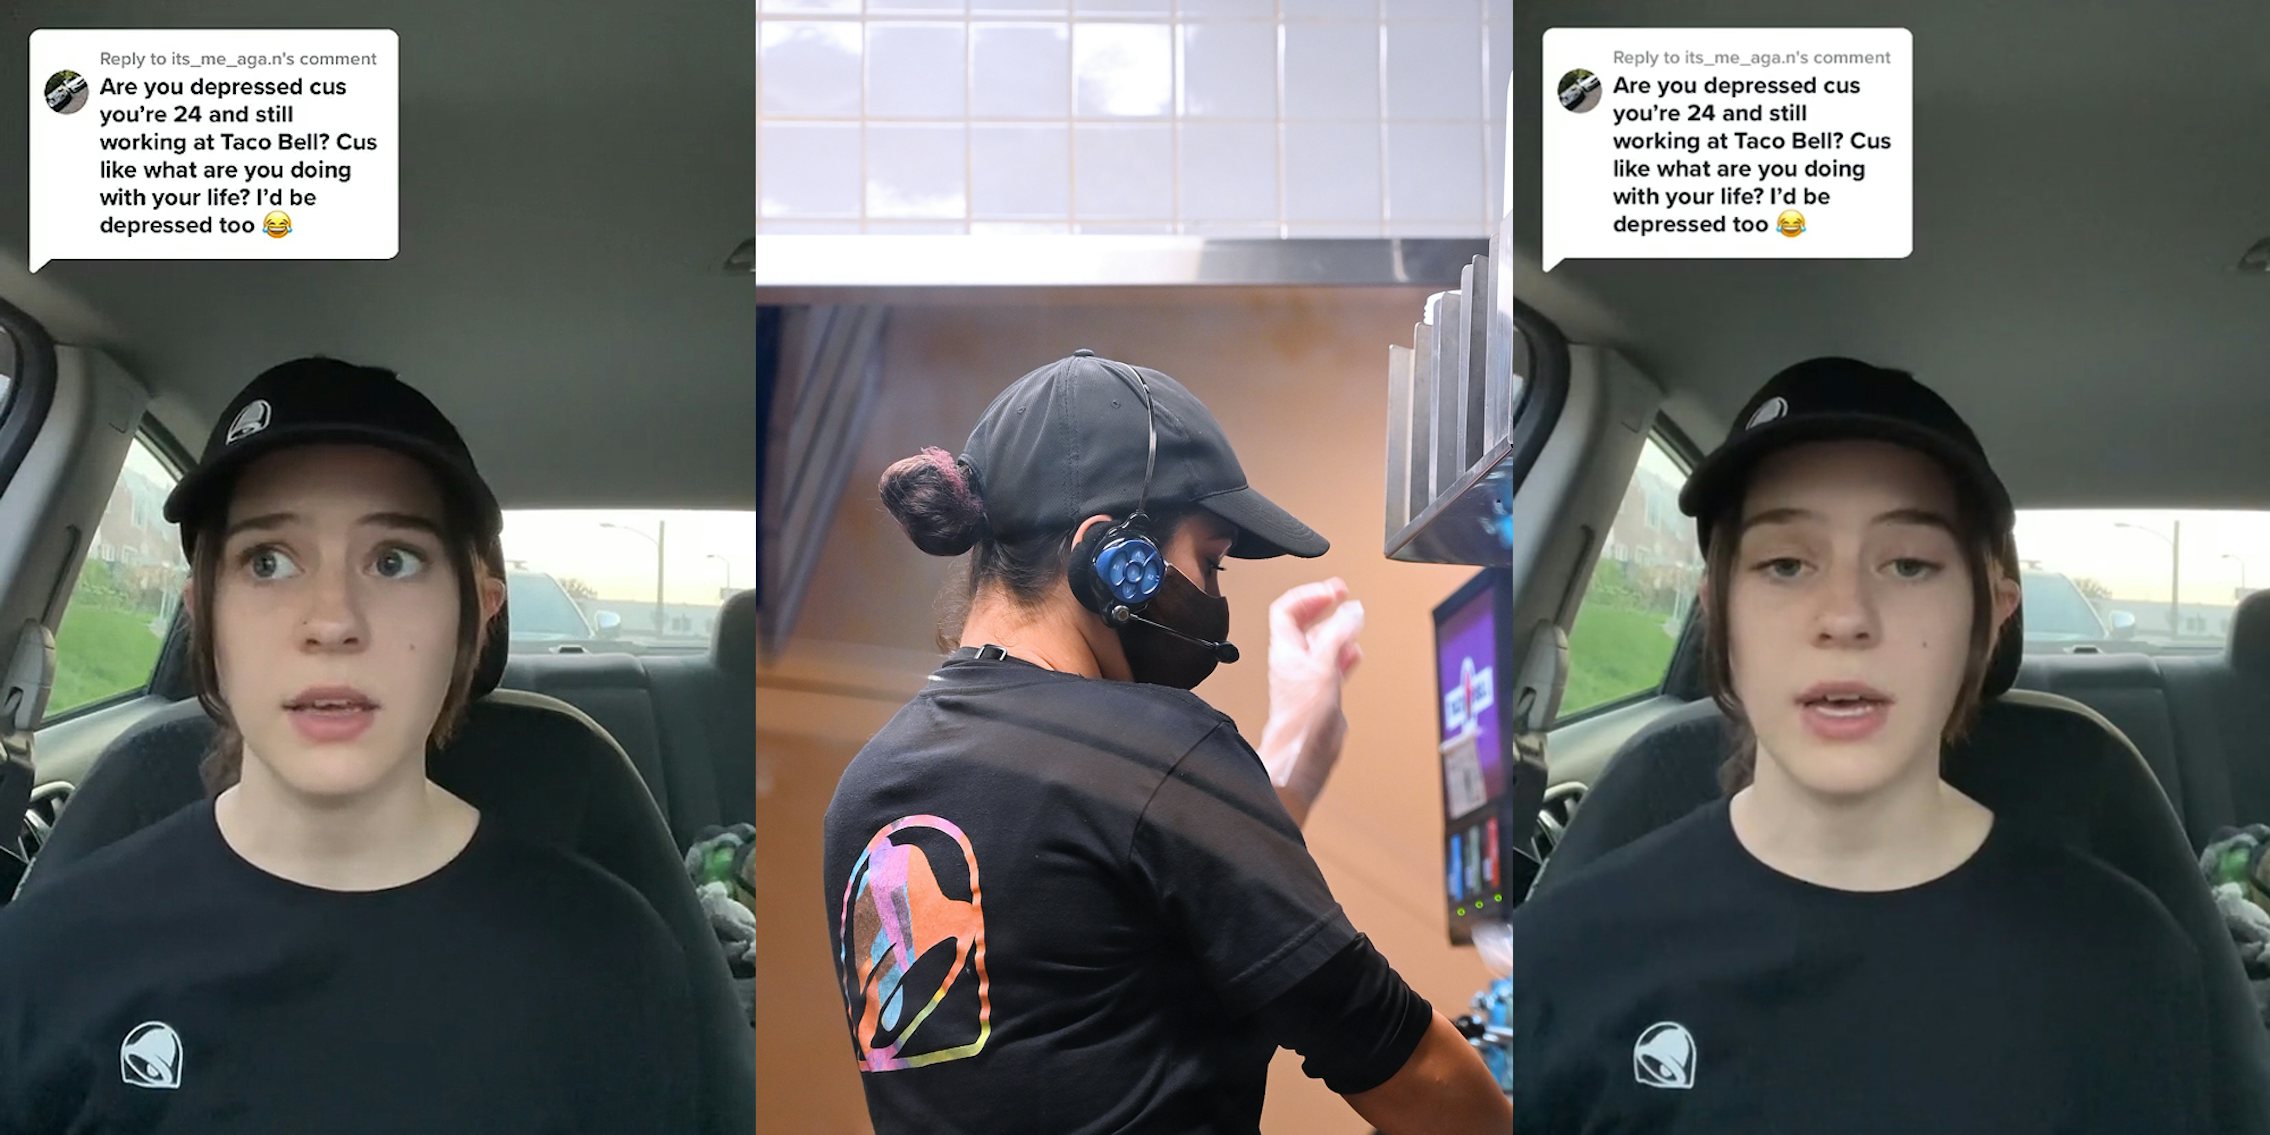 Taco Bell worker speaking in car caption 'Are you depressed cus you're 24 and still working at Taco Bell? Cus like what are you doing with your life? I'd be depressed too' (l) Taco Bell worker at window taking orders (c) Taco Bell worker speaking in car caption 'Are you depressed cus you're 24 and still working at Taco Bell? Cus like what are you doing with your life? I'd be depressed too' (r)